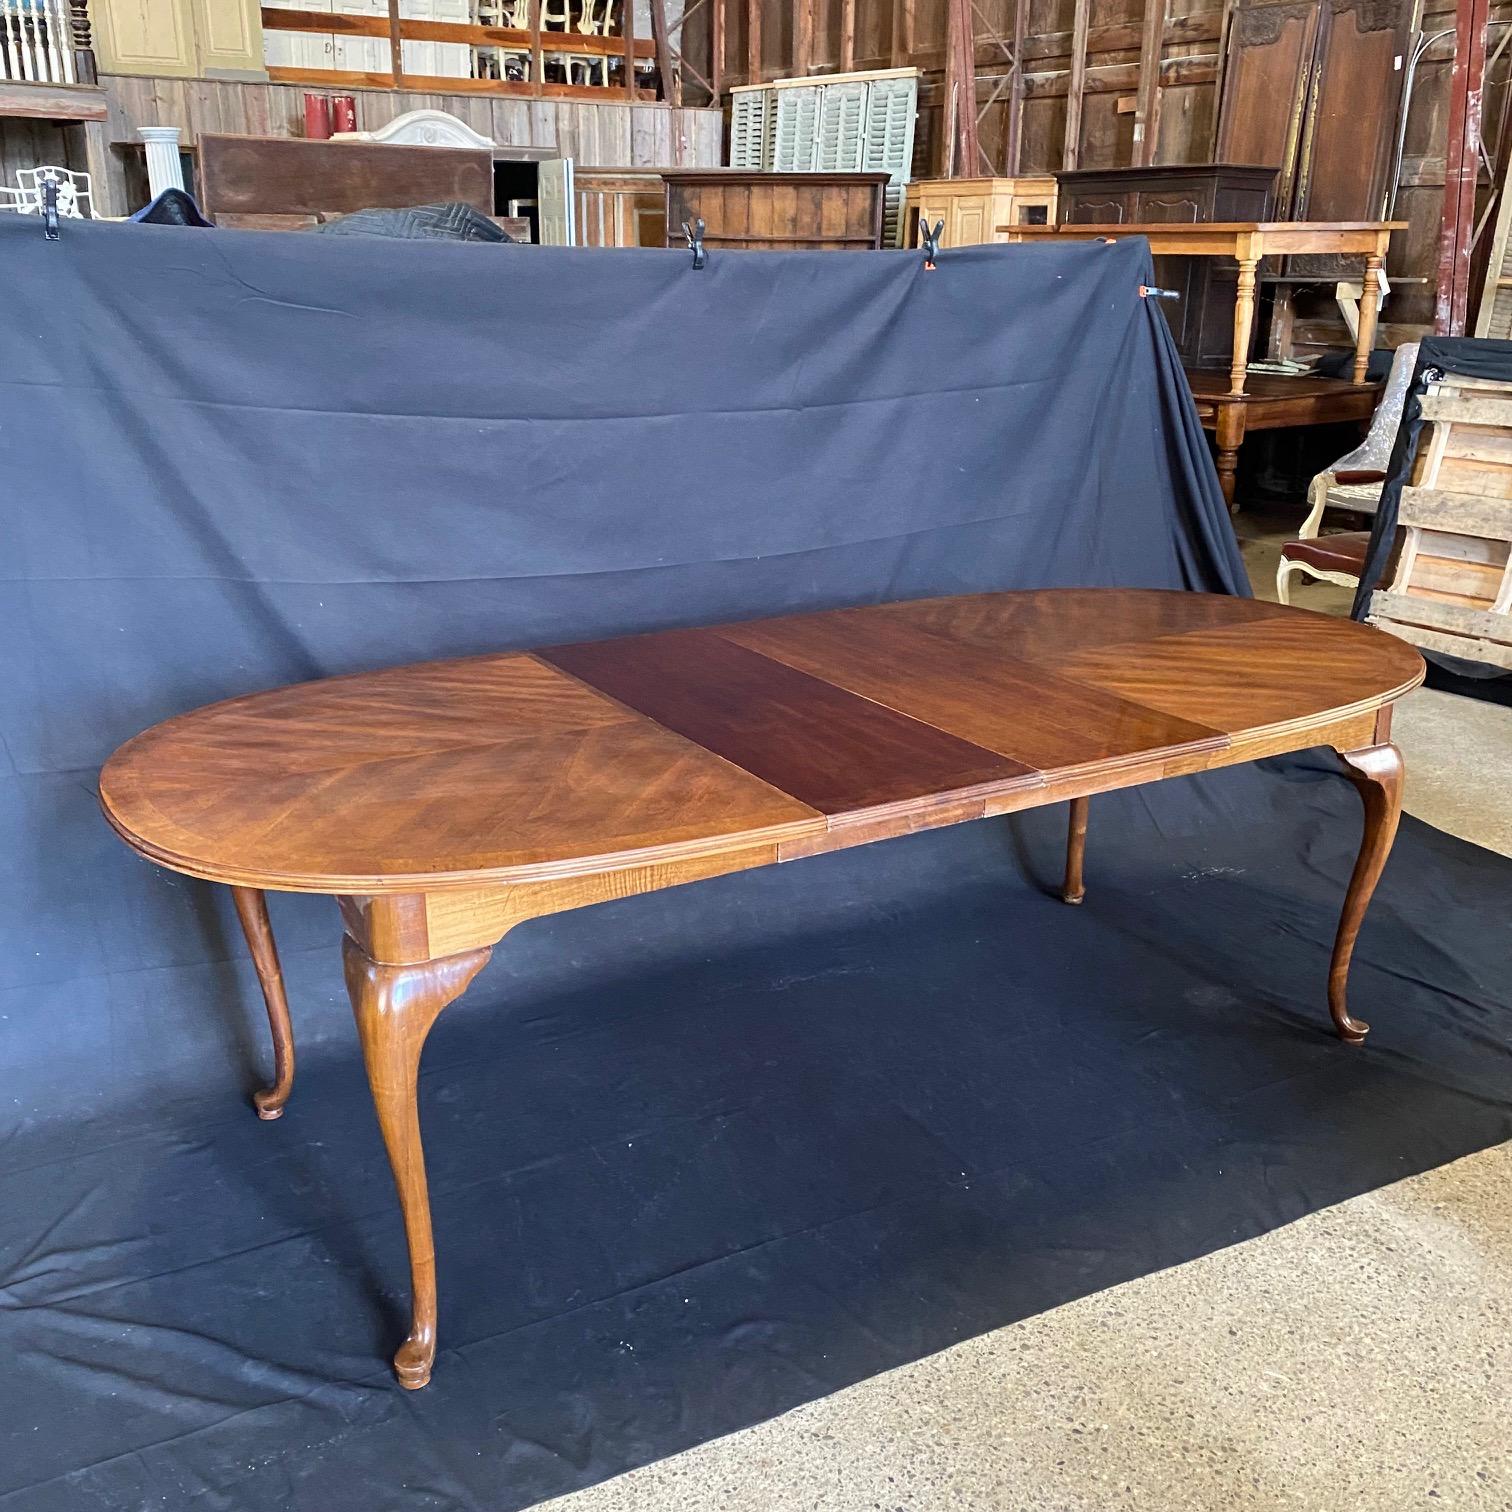 British Georgian court style Queen Anne oval extension table made from walnut with two leaves for extension, shapely legs and pad feet. Table is 66